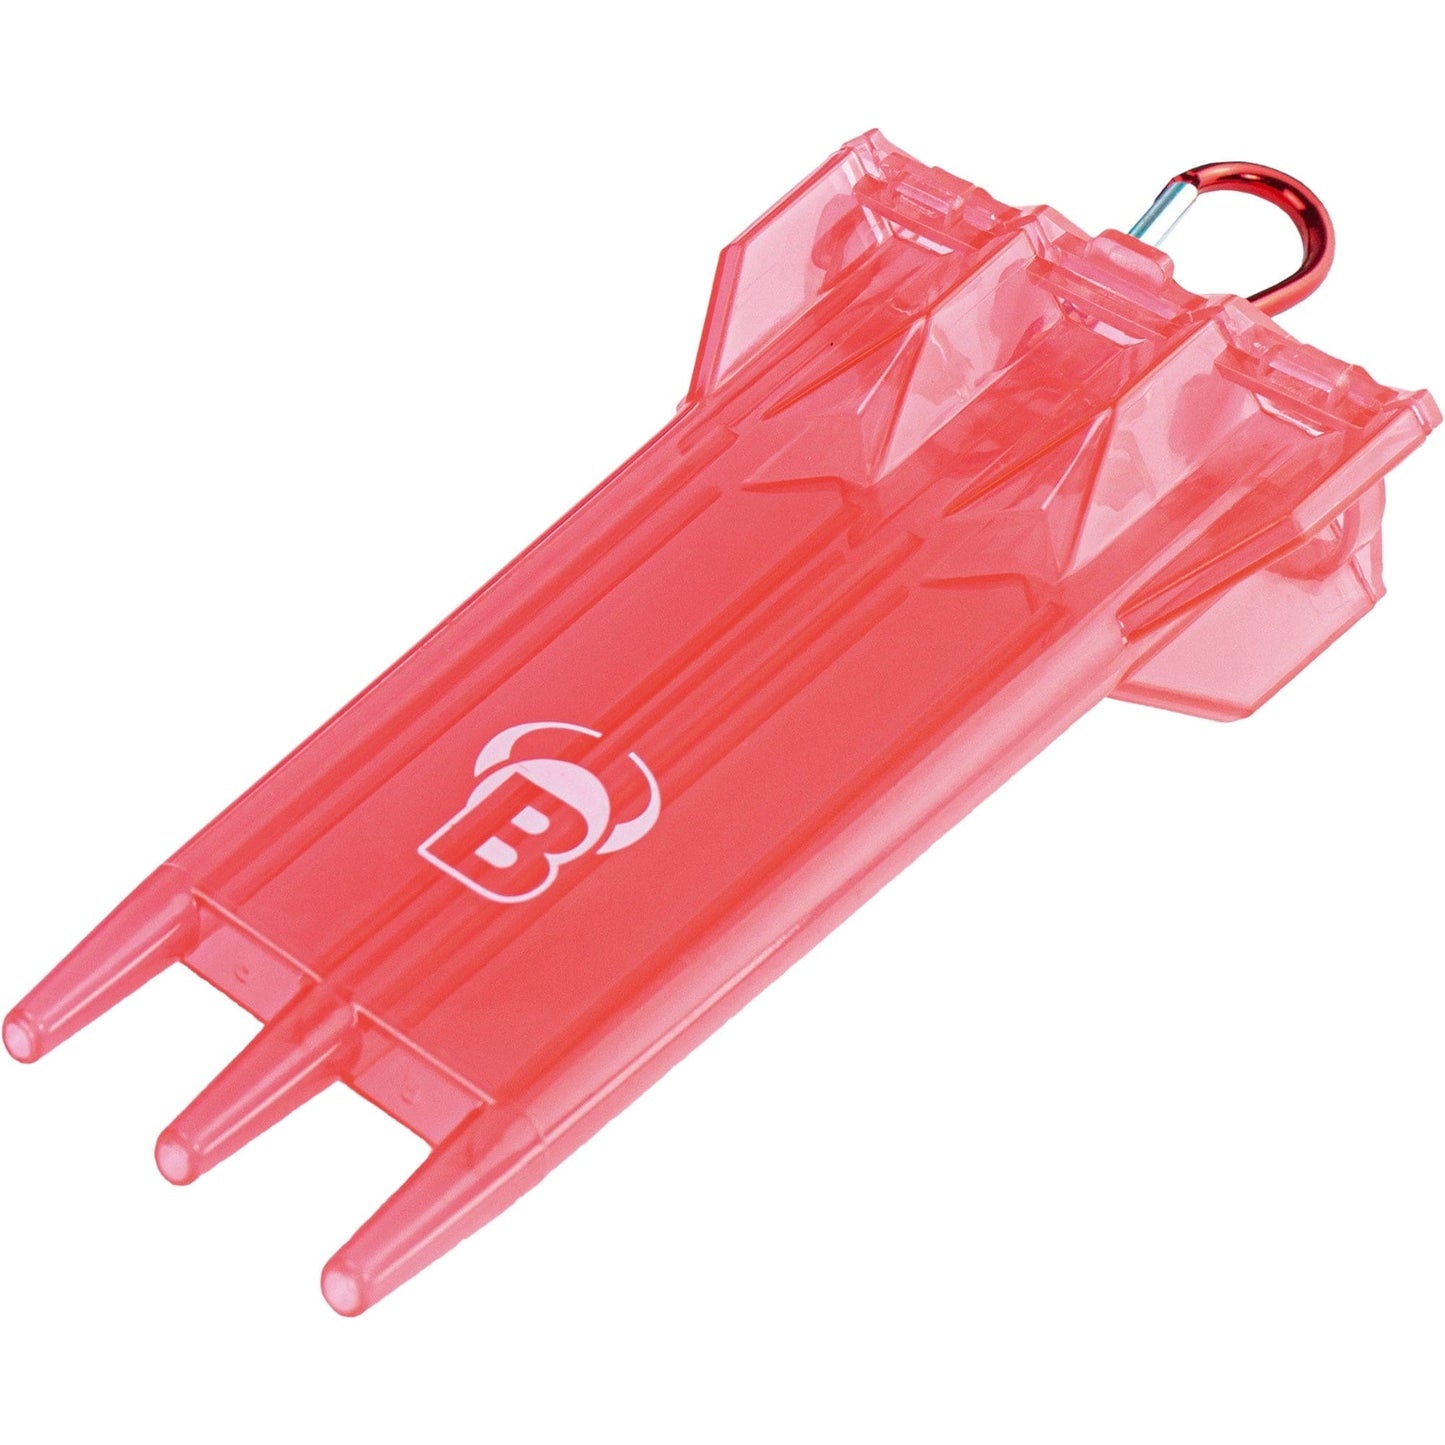 BULL'S Acra X Dart Case - Holds Fully Set Up Darts - Colours Red